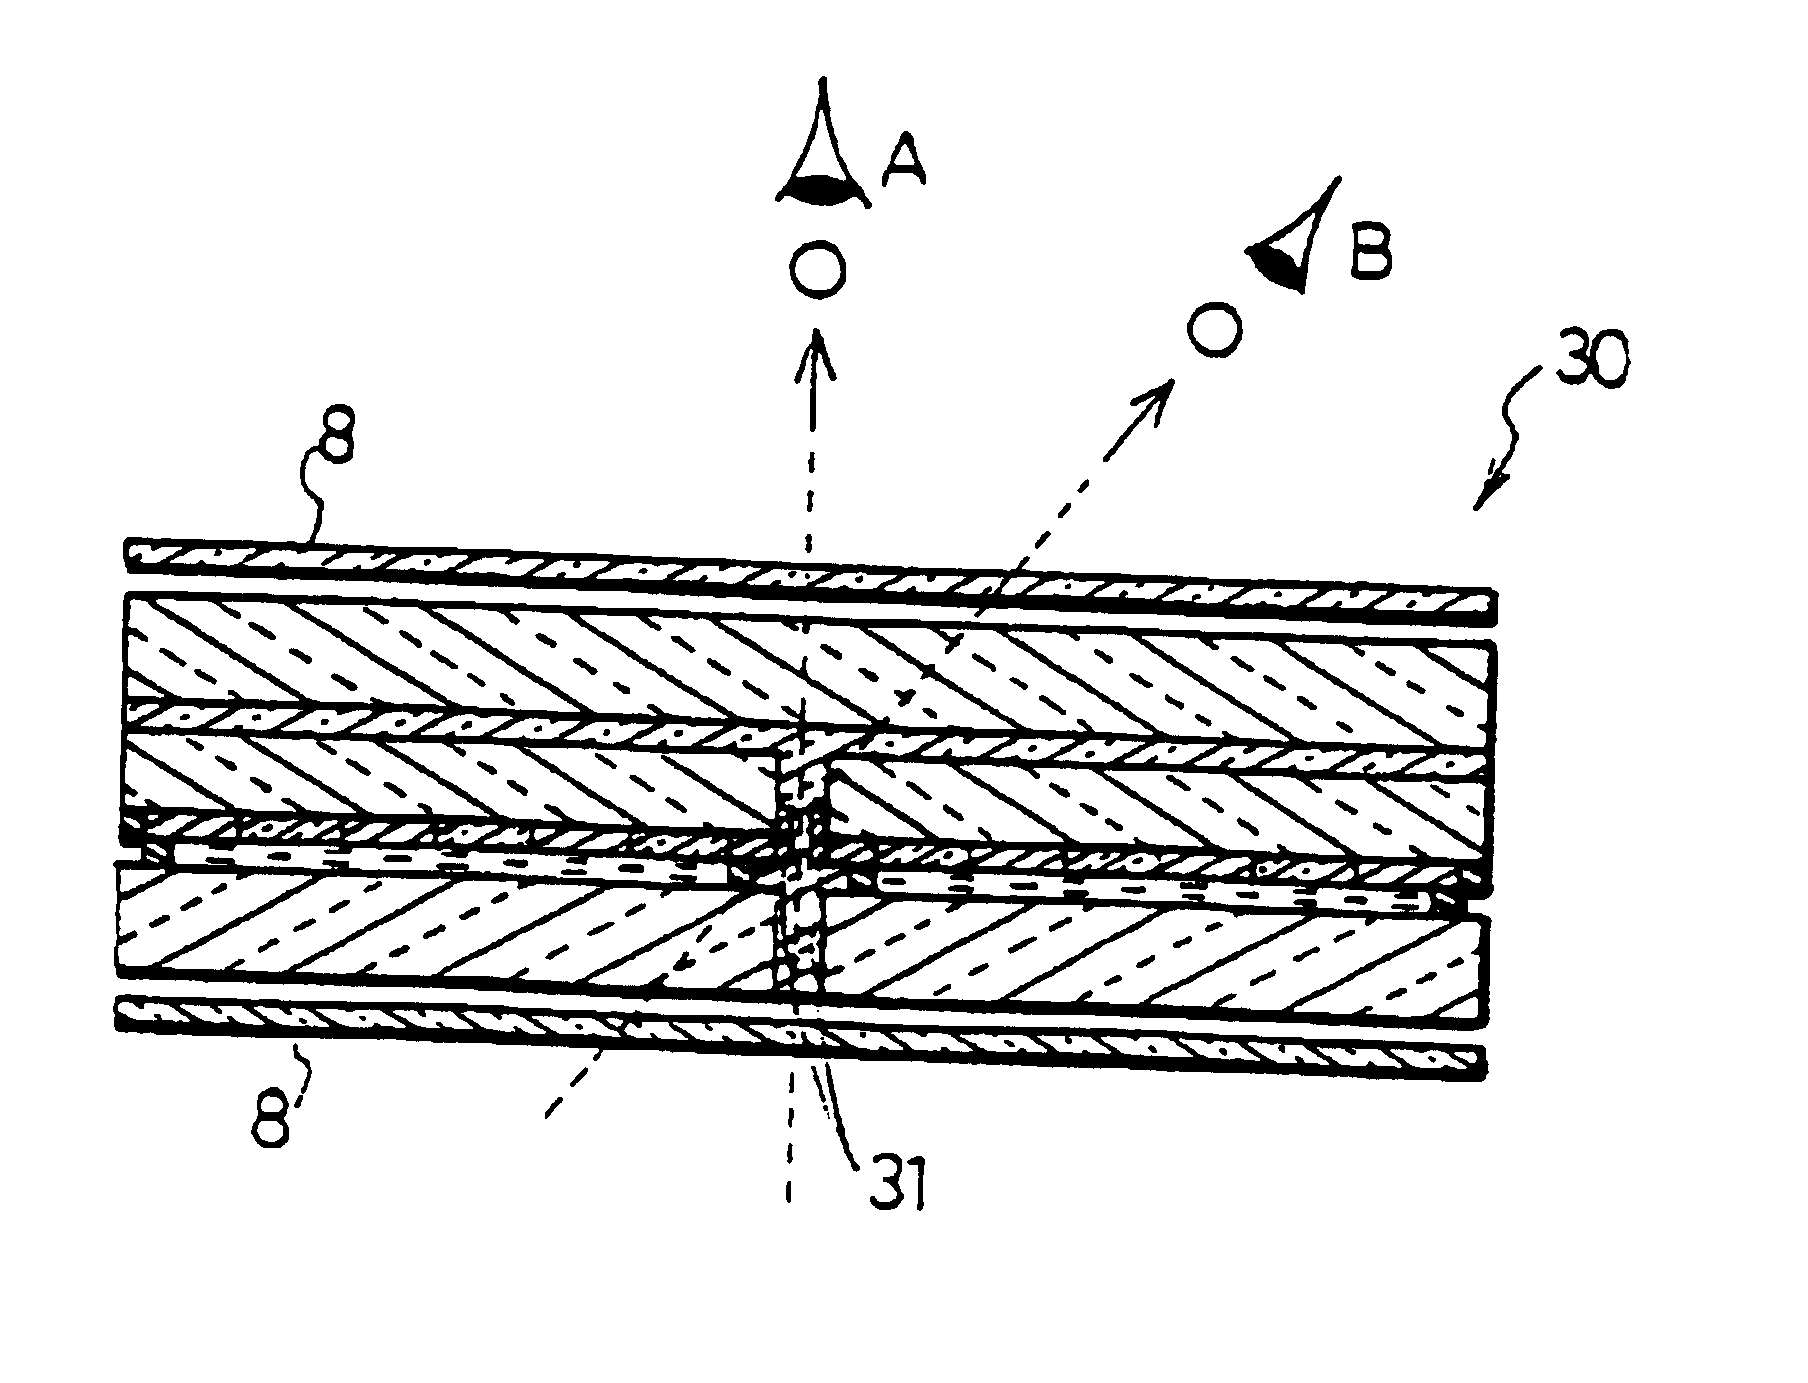 Liquid crystal display formed by a plurality of non-electrically interconnected liquid crystal display panels